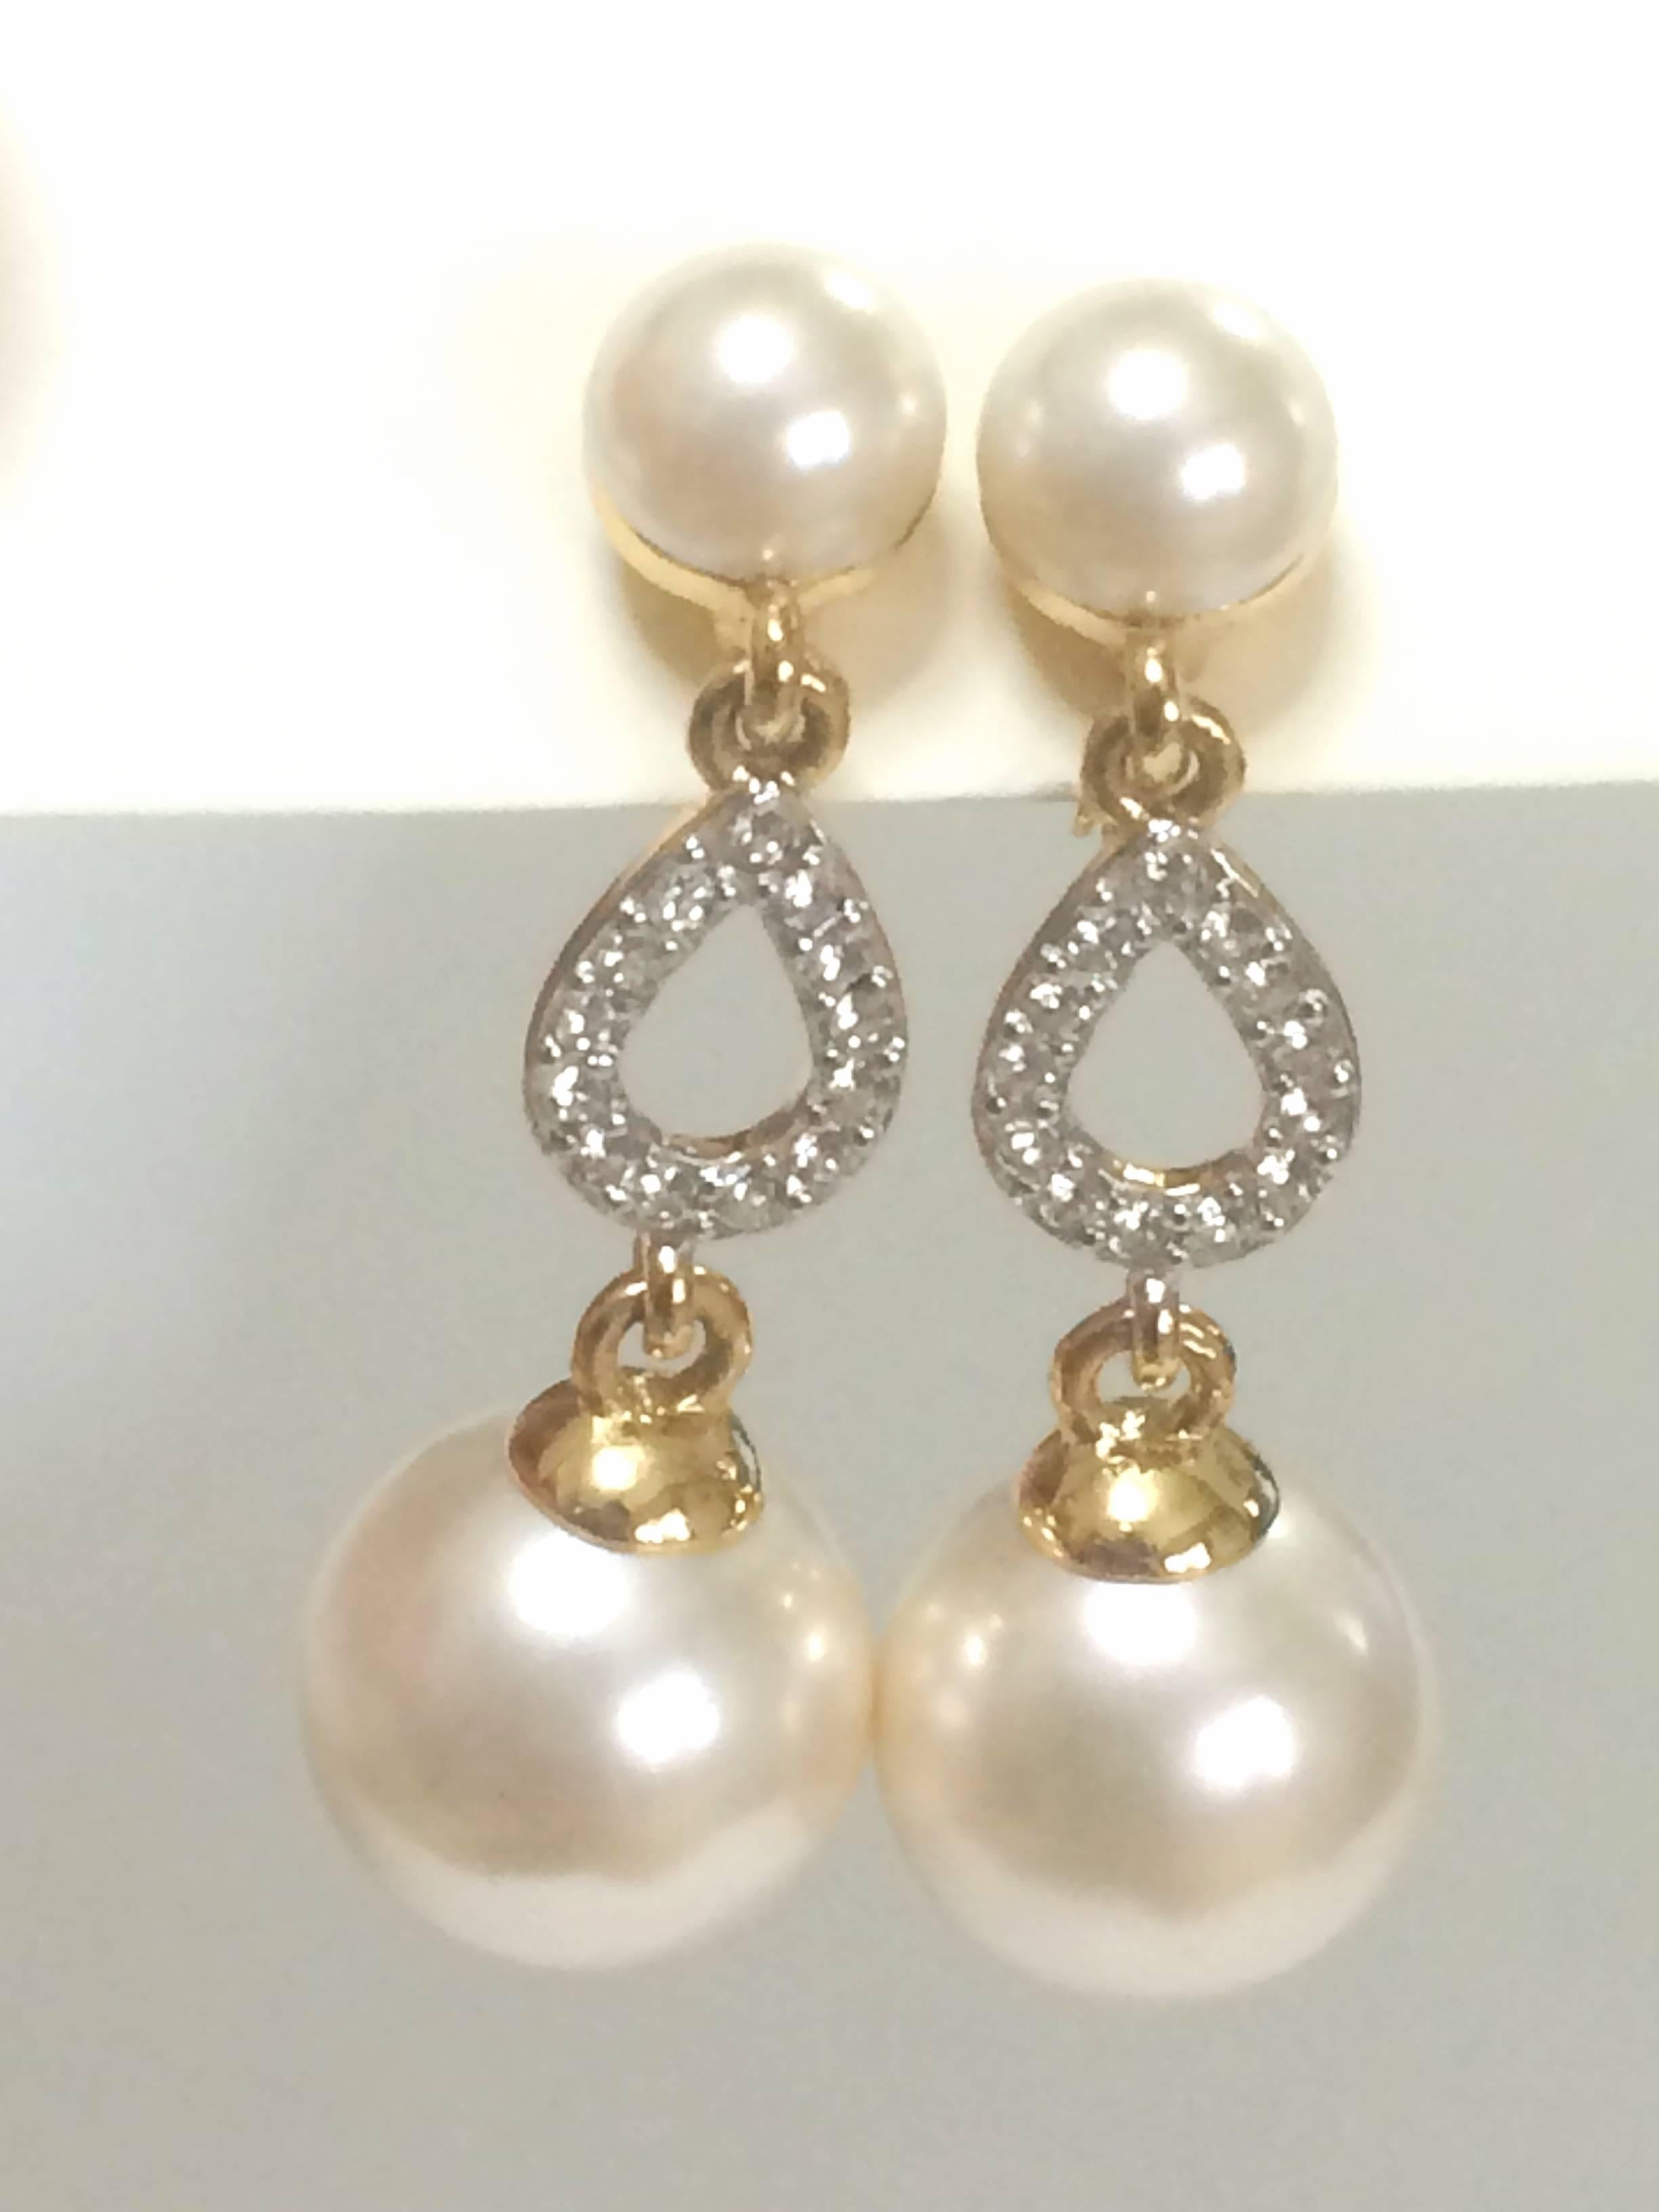 1990s. Vintage Nina Ricci white faux pearl and crystal stone teardrop dangling earrings. Classic and beautiful jewelry piece.

Introducing a pair of classic dangling earrings from Nina Ricci back in the 90's.

Featuring faux pearl balls with the